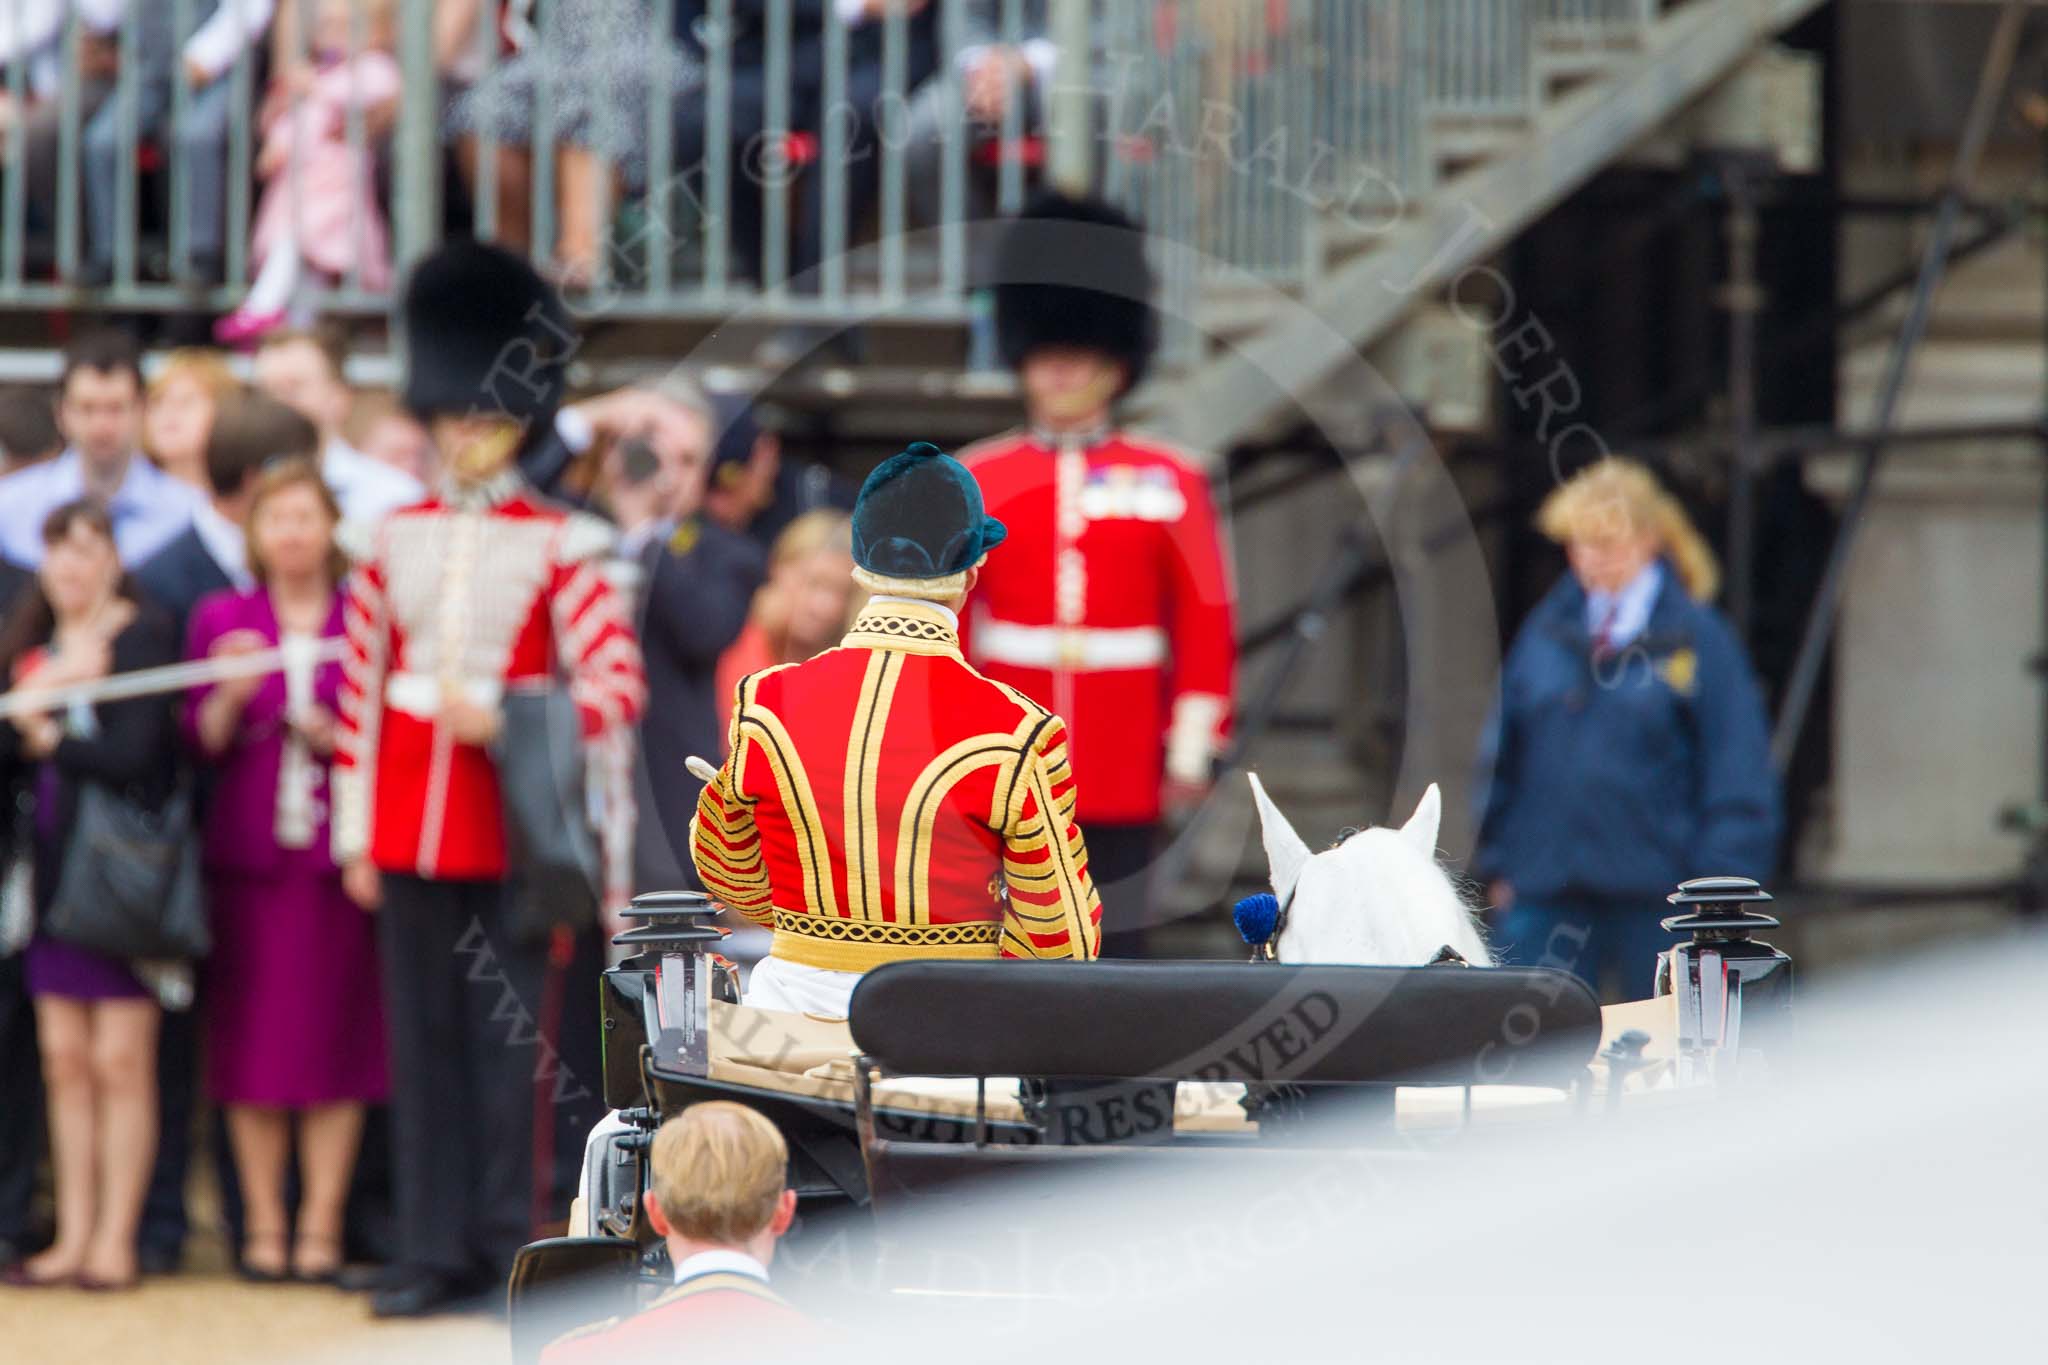 Trooping the Colour 2014.
Horse Guards Parade, Westminster,
London SW1A,

United Kingdom,
on 14 June 2014 at 11:09, image #452